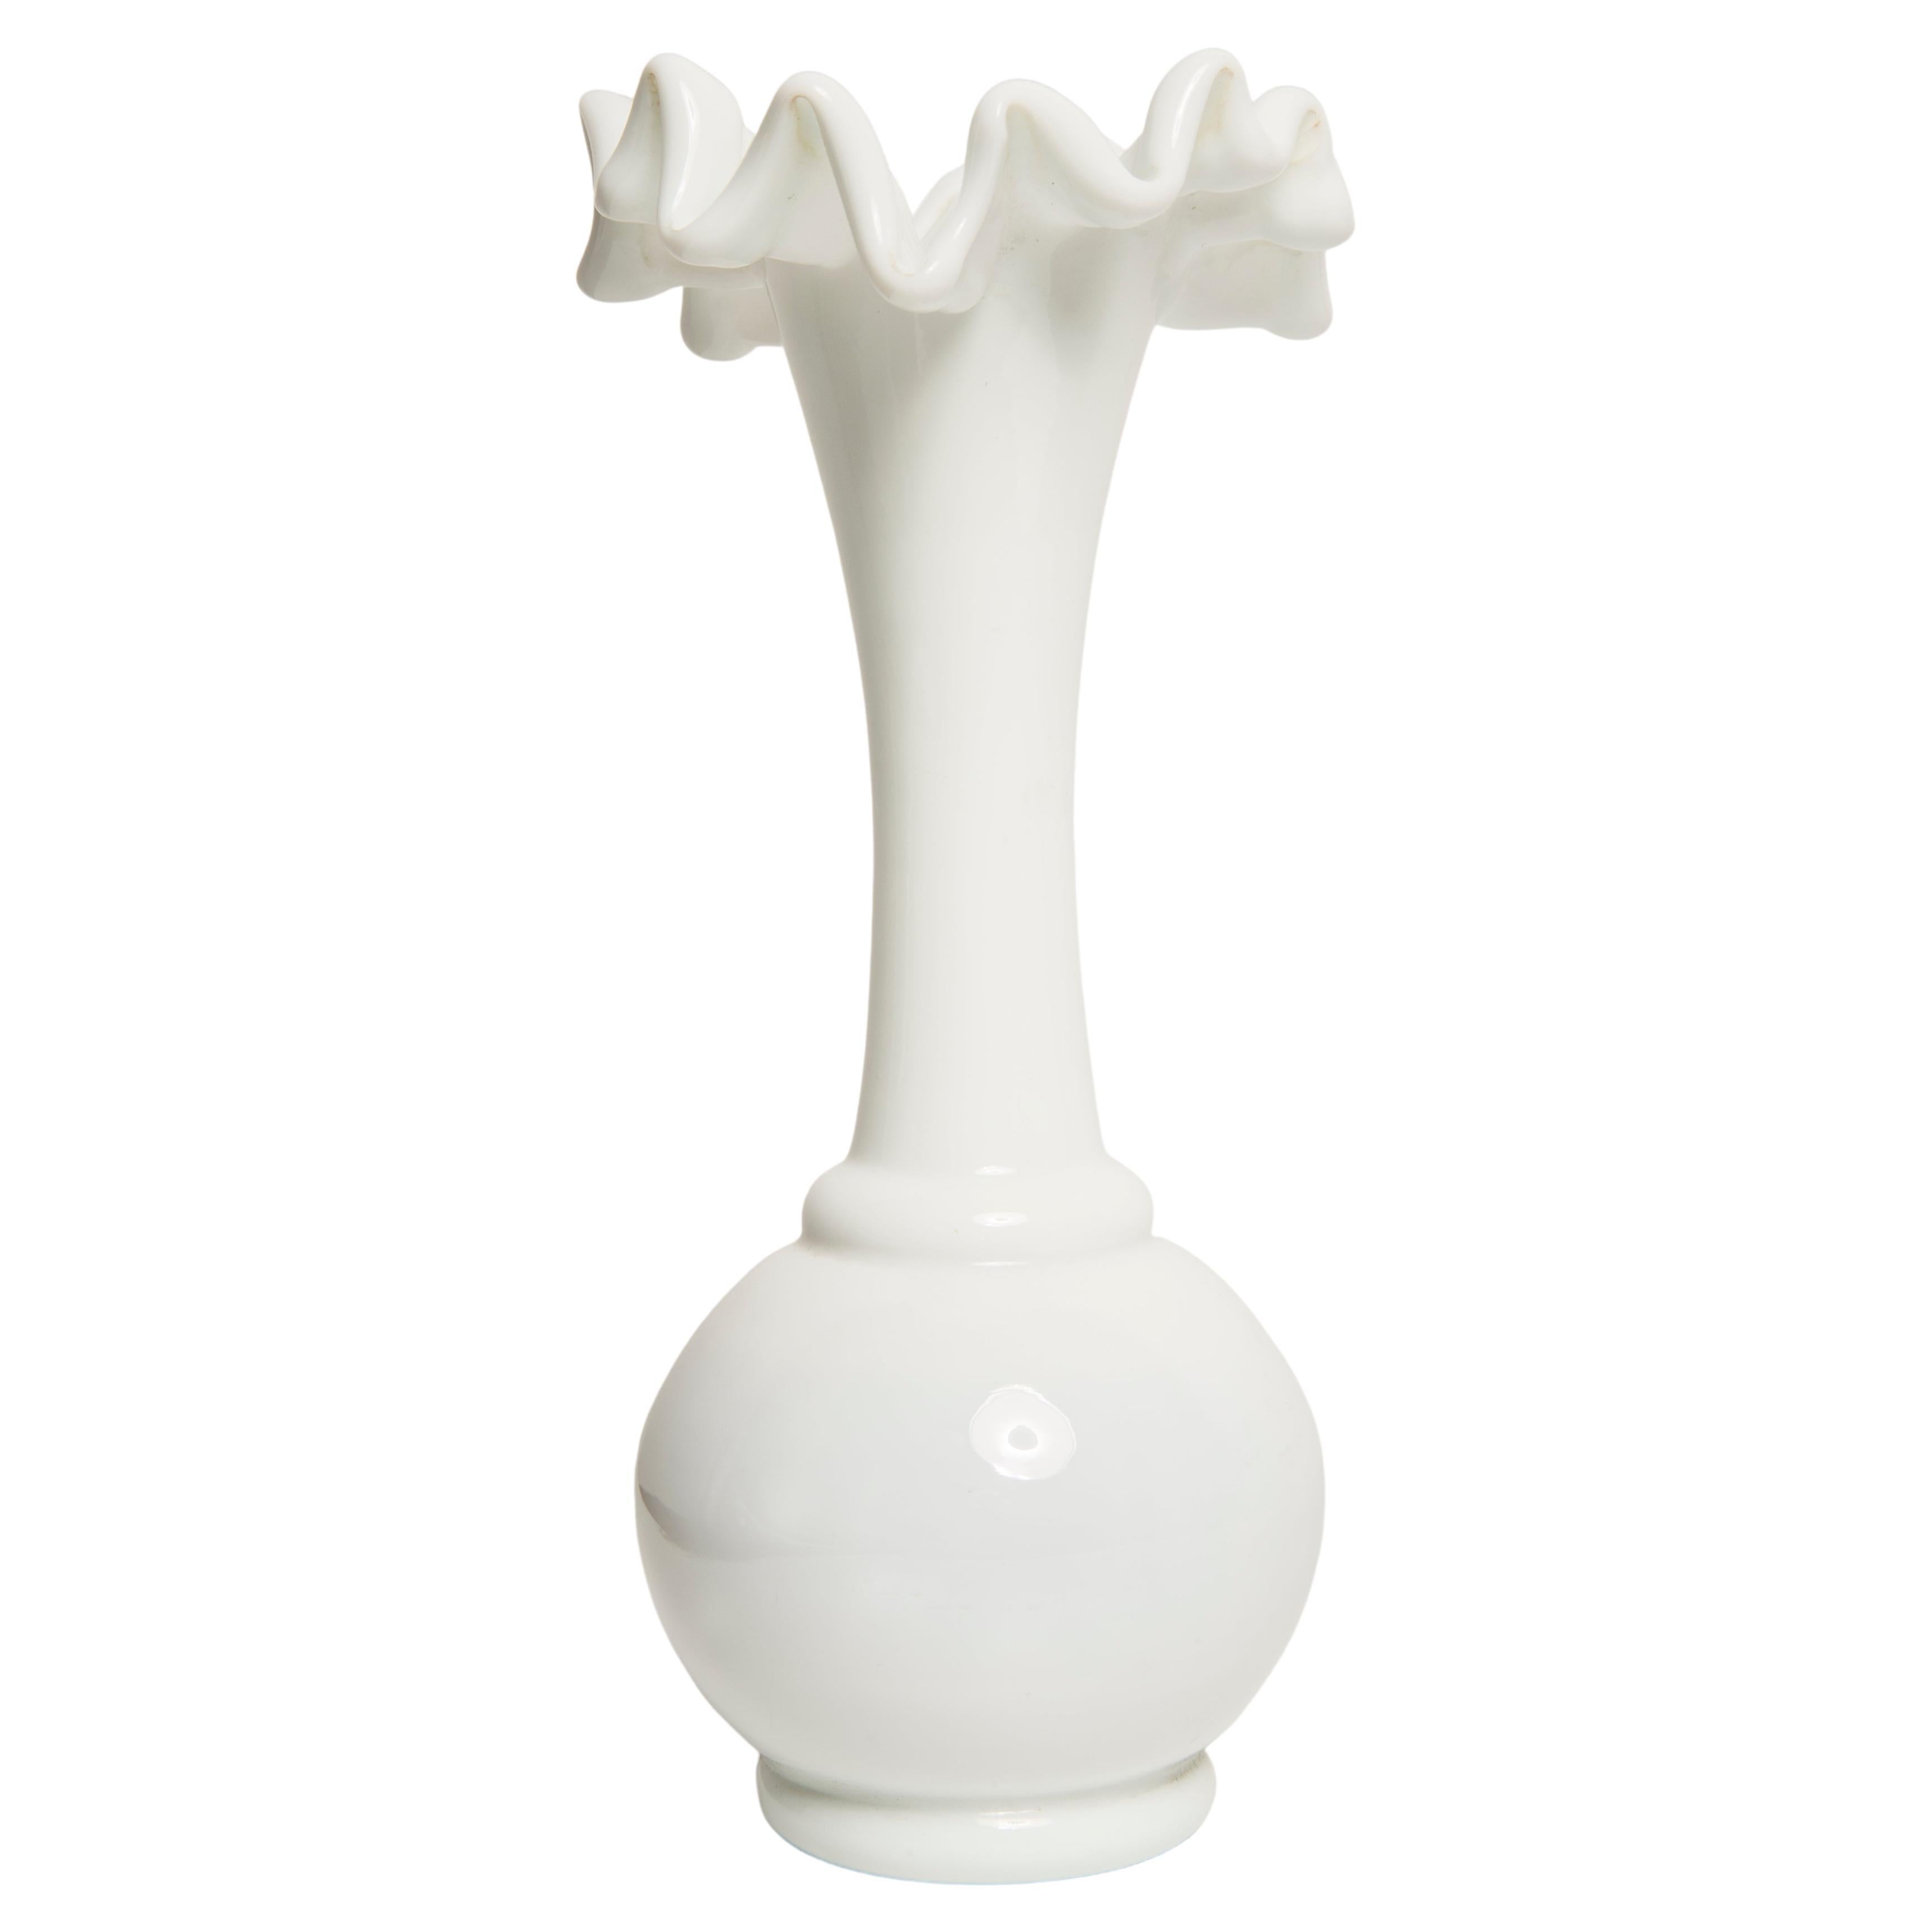 Midcentury Porcelain White Mini Vase with a Frill, Europe, 1960s For Sale